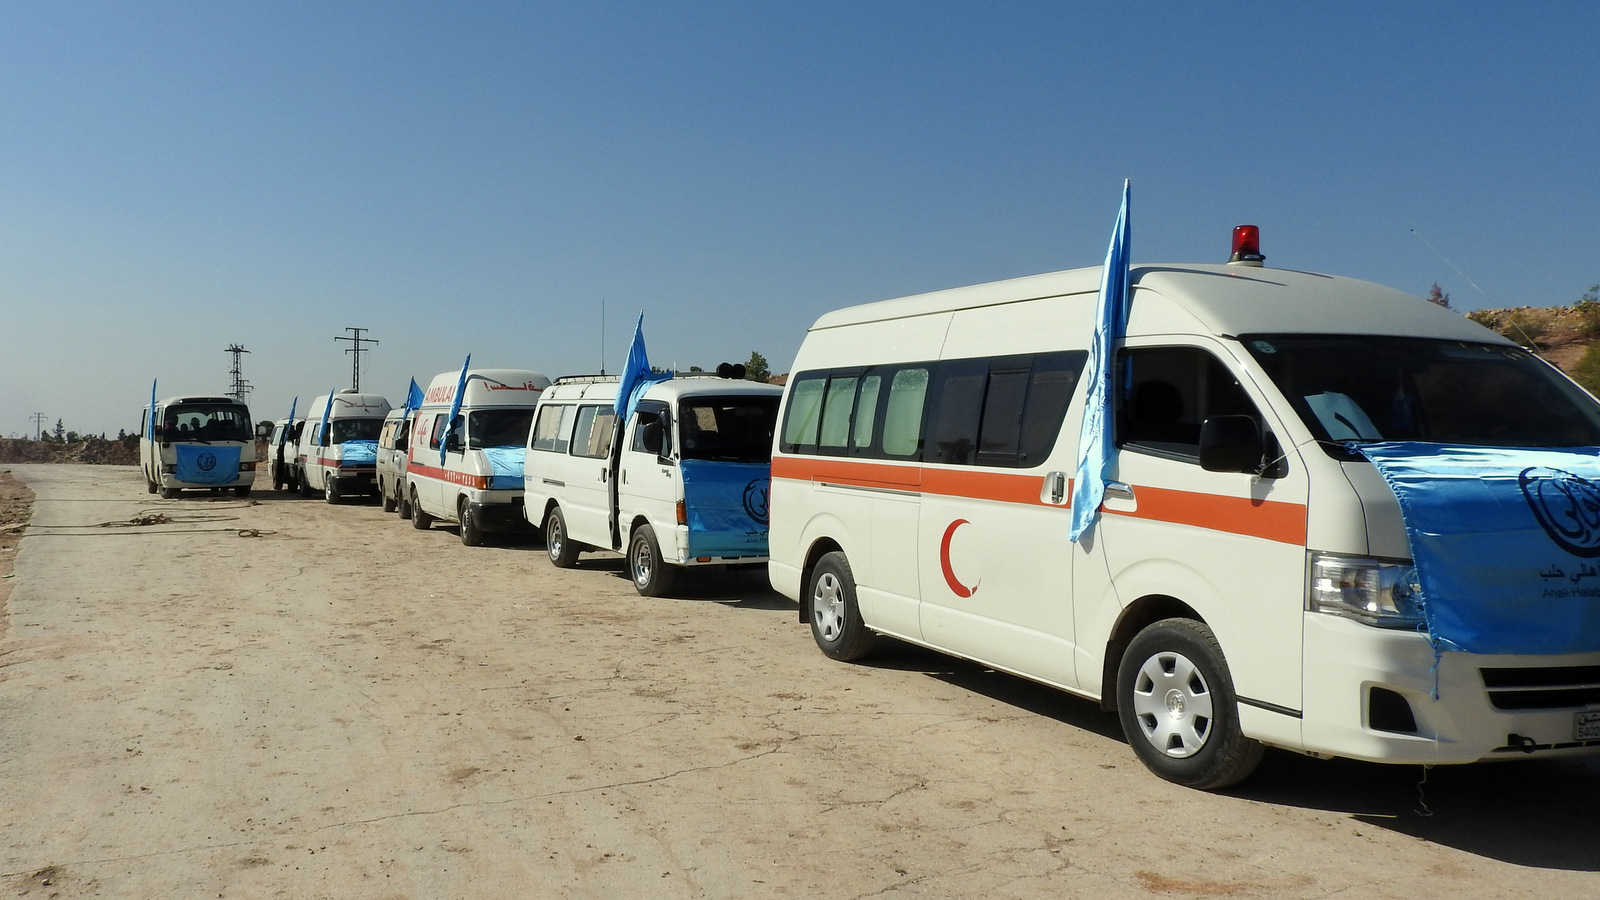 Ten ambulances wait at the Castello Road crossing to treat anyone exiting via the humanitarian corridors established by the Syrian government and Russia, including militants who lay down their arms. Nov. 4, 2016. (Photo: Eva Bartlett)